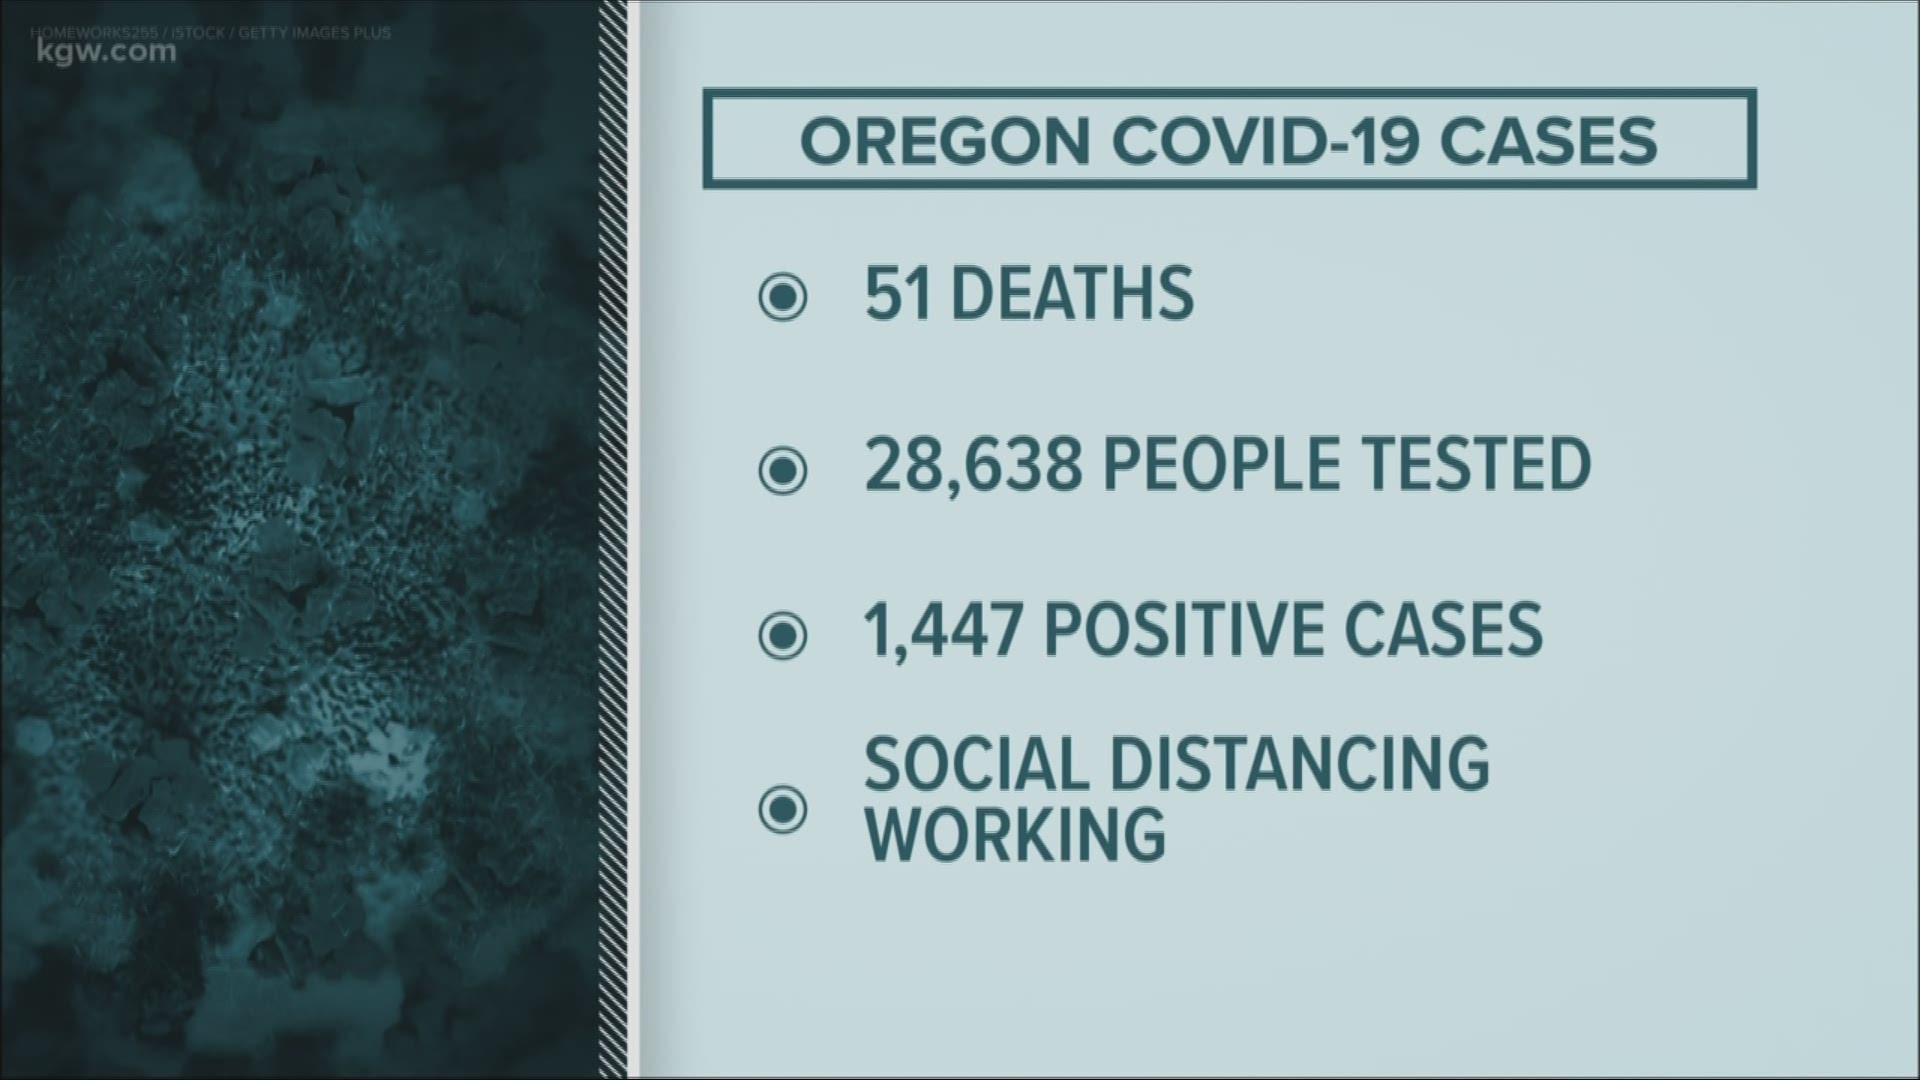 On Saturday, Oregon officials announced 3 more deaths and 76 new cases in Oregon. The numbers in Washington and across the country are still climbing.